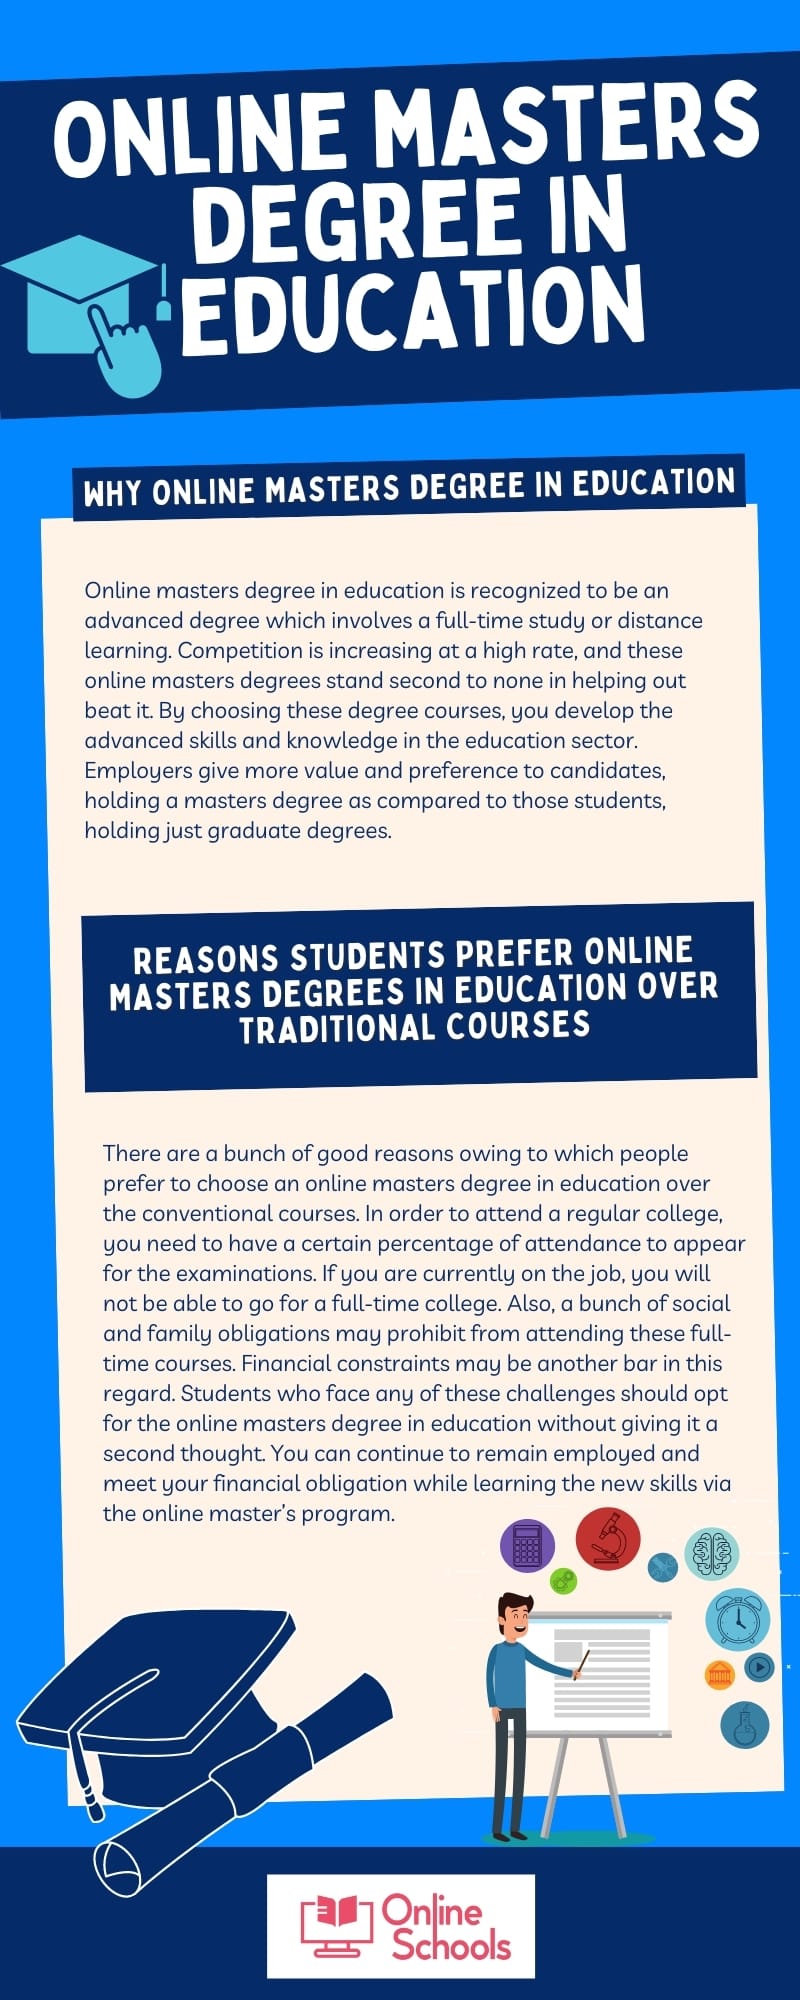 Online masters degree in education